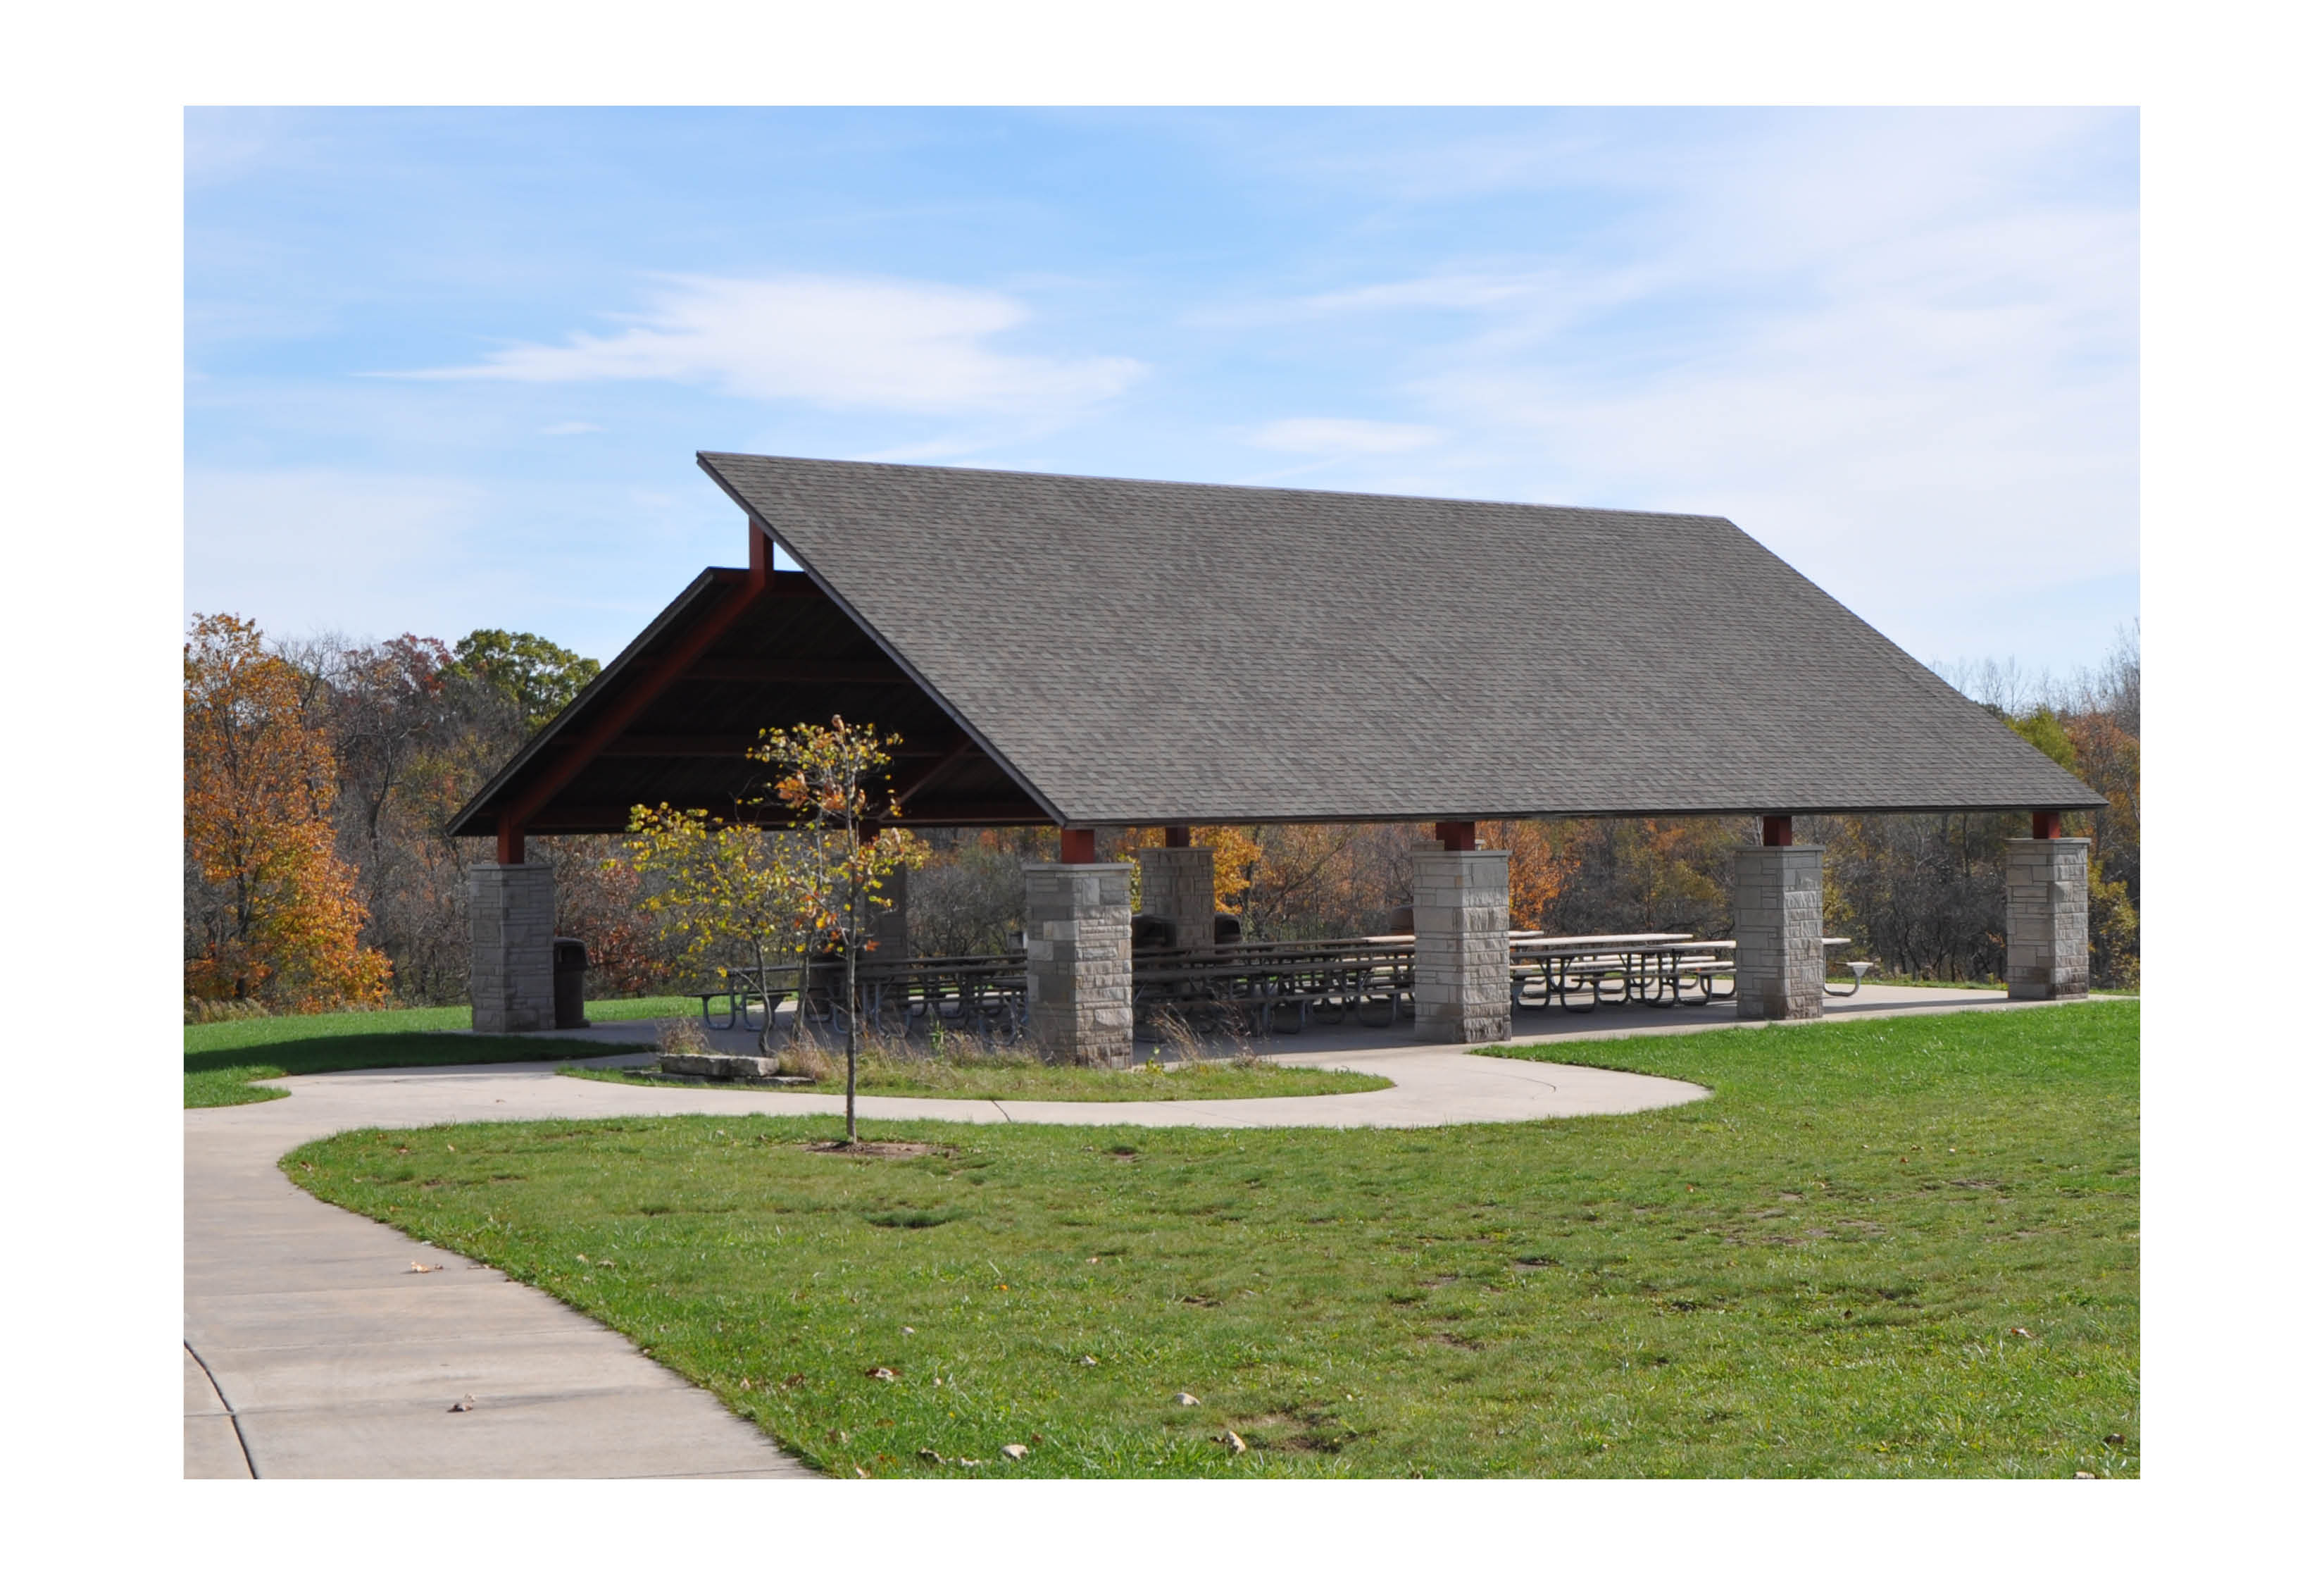 The picnic shelter at LaPorte Road Access.